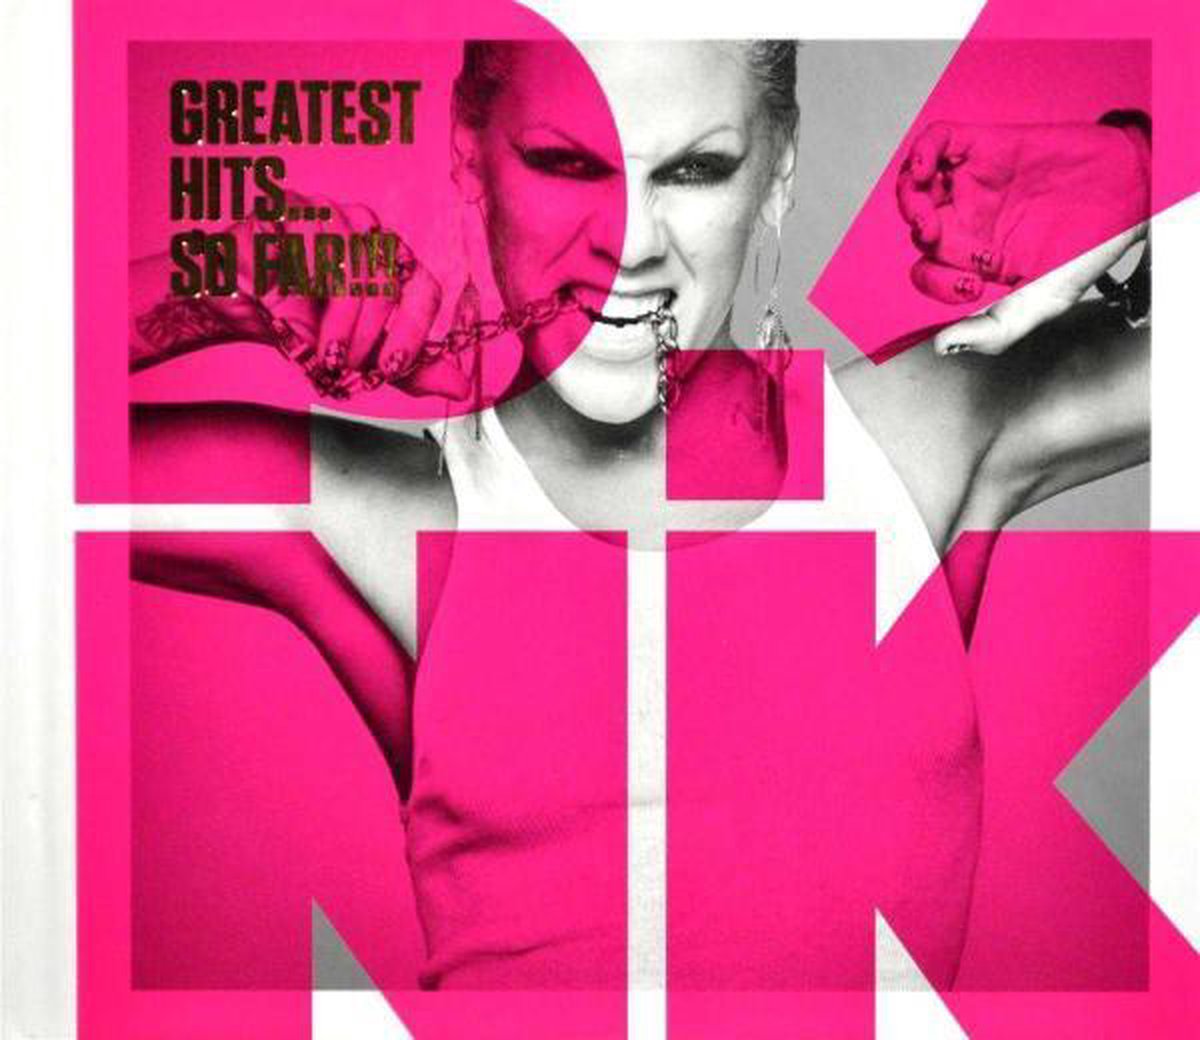 Greatest Hits...So Far!!! (Deluxe Edition) - P!Nk